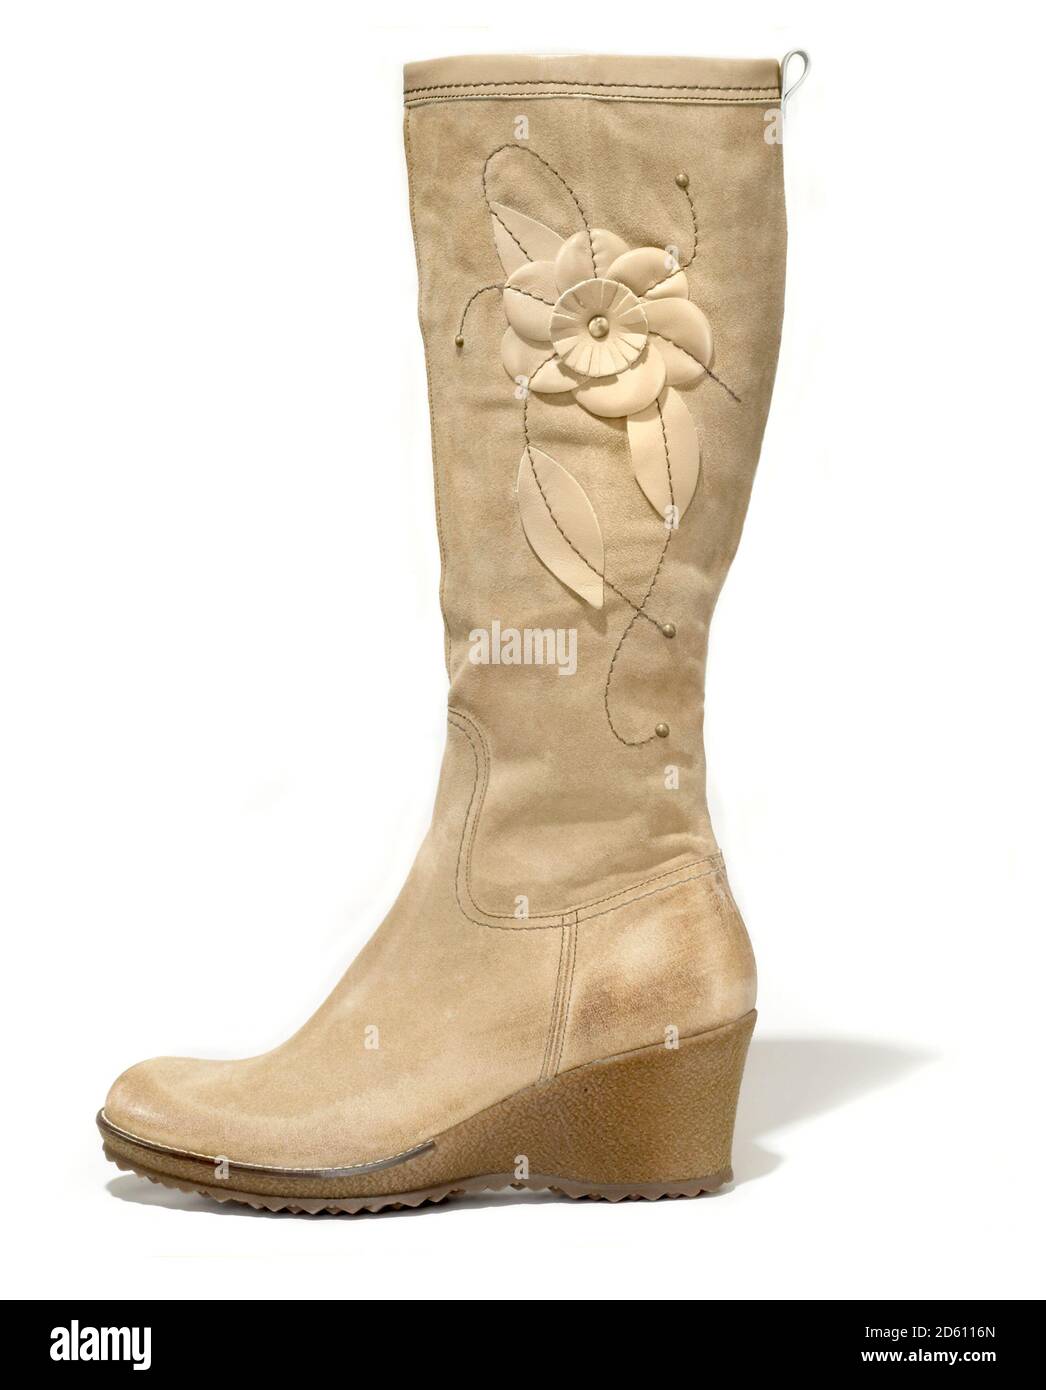 high calf laced boots from antiquity